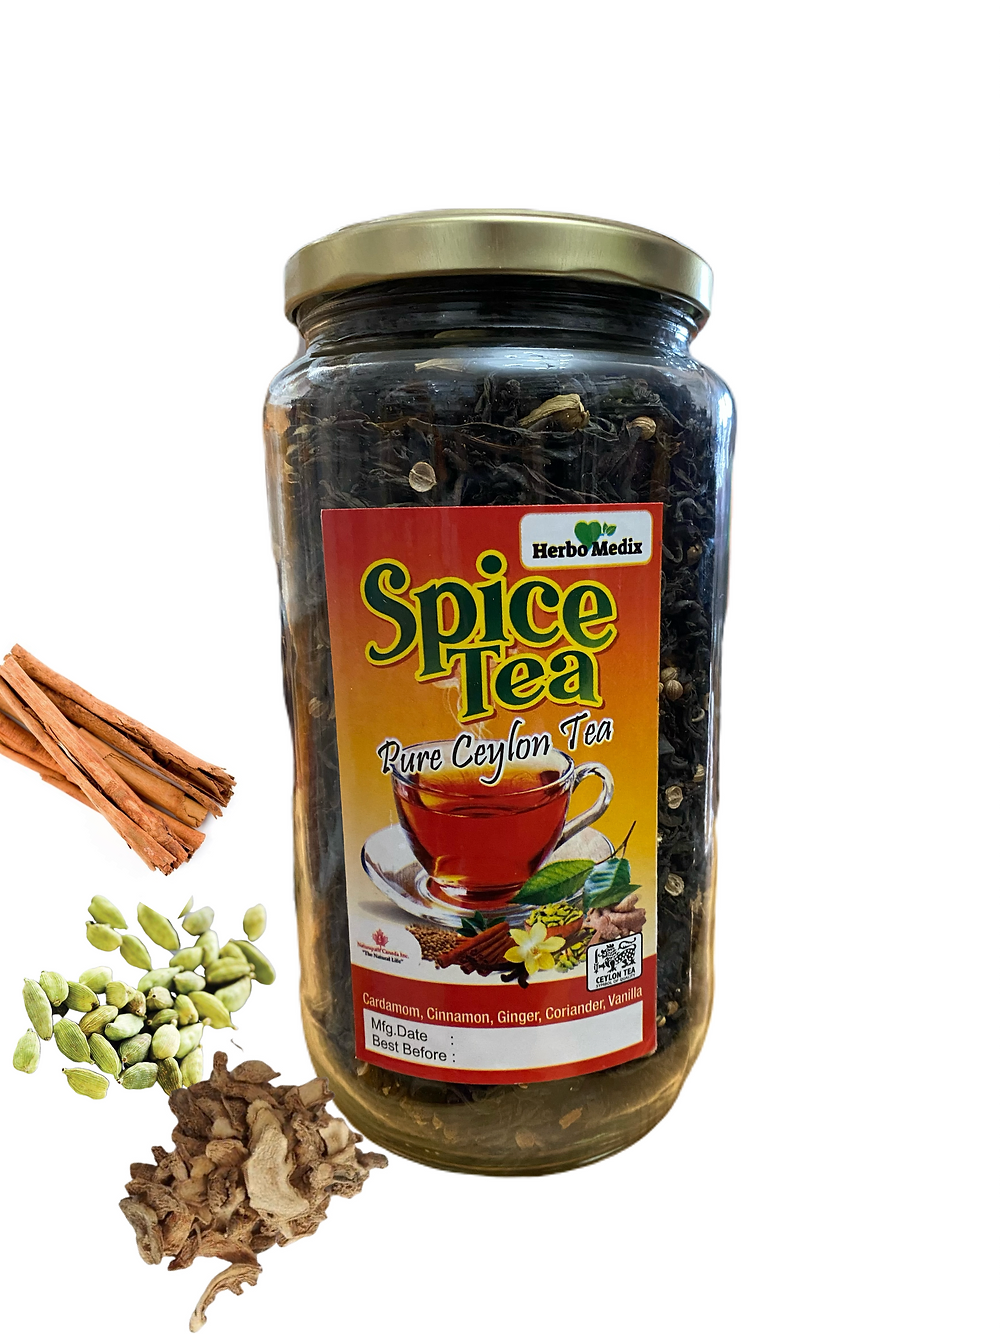 Spice Tea | 200g | மசாலா தேநீர் | Best Immune Booster | Amazing Taste | Includes cardamom, dried ginger, coriander seeds, cinnamon, and much more